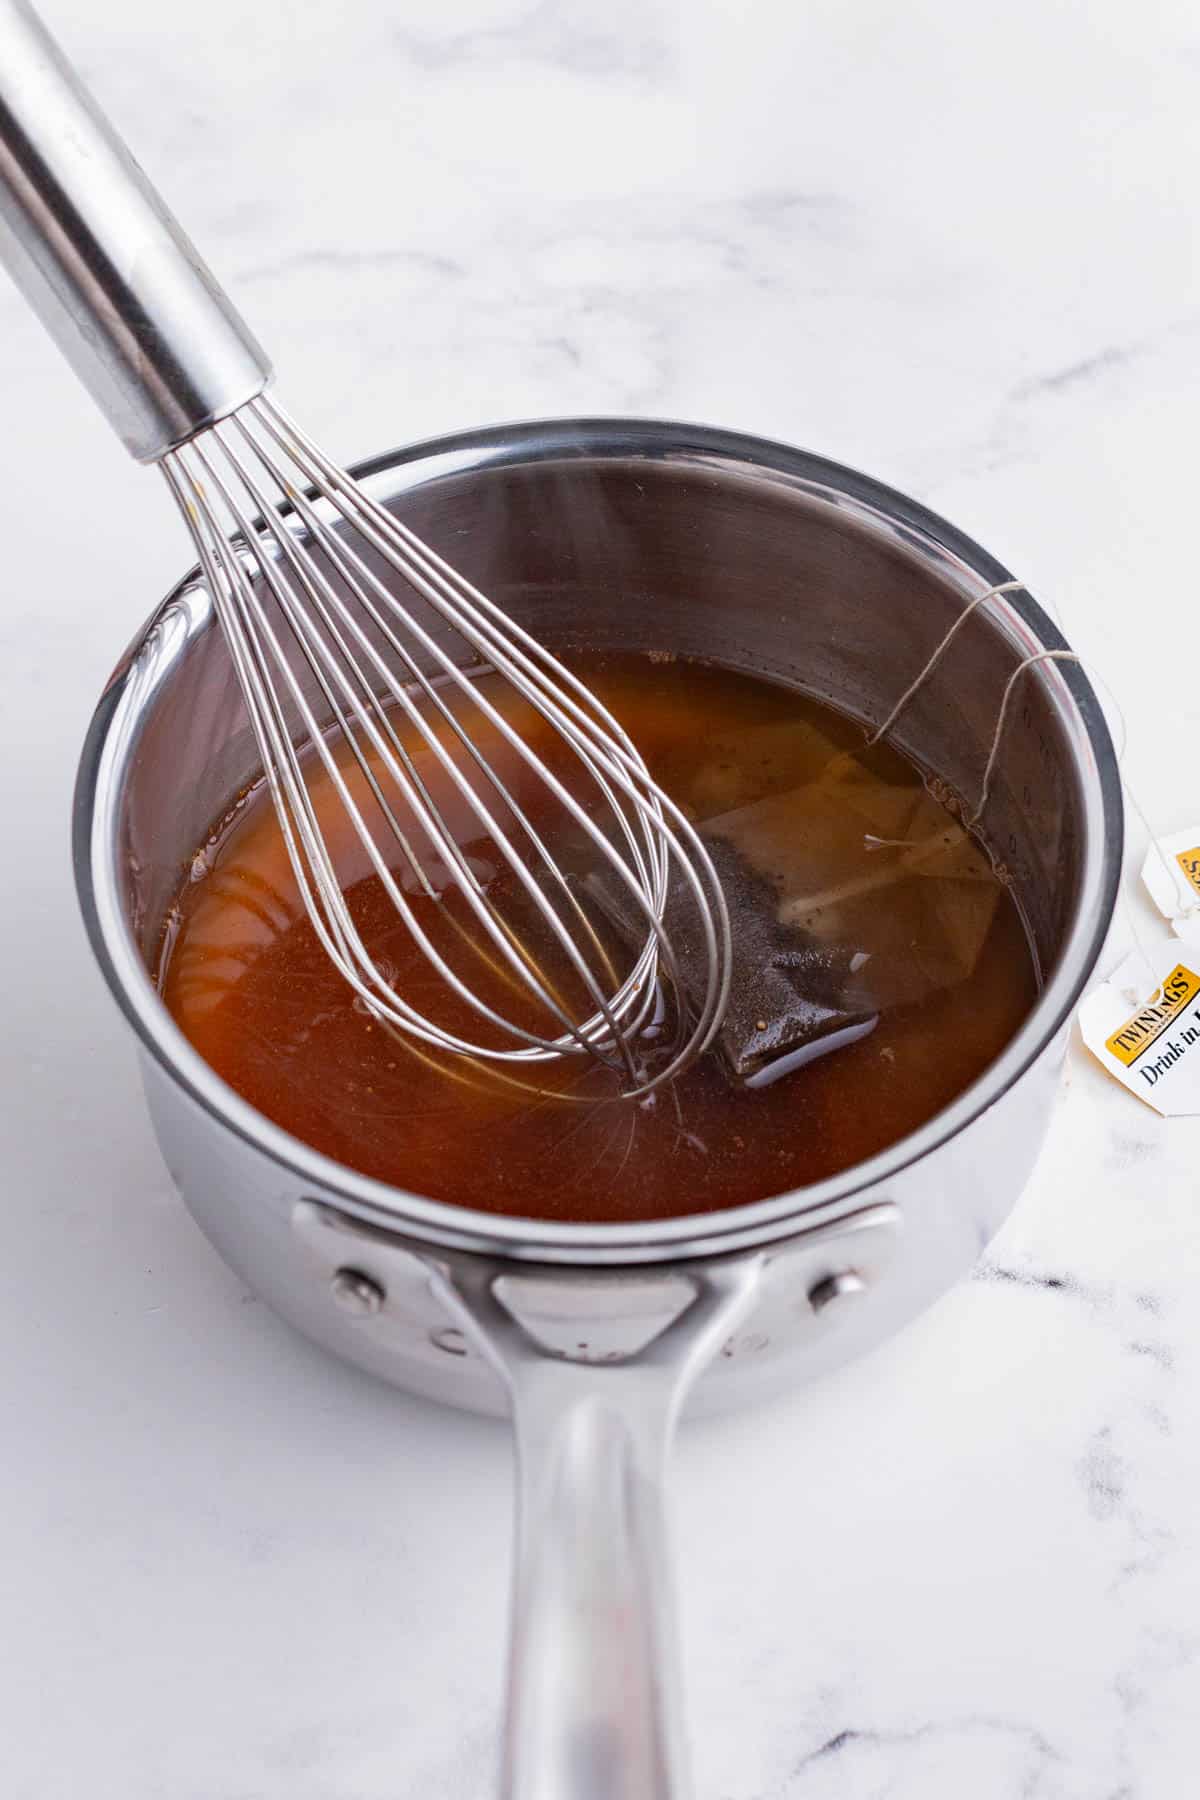 Black tea bags are added to water with sweetener and spices and heated on the stove.